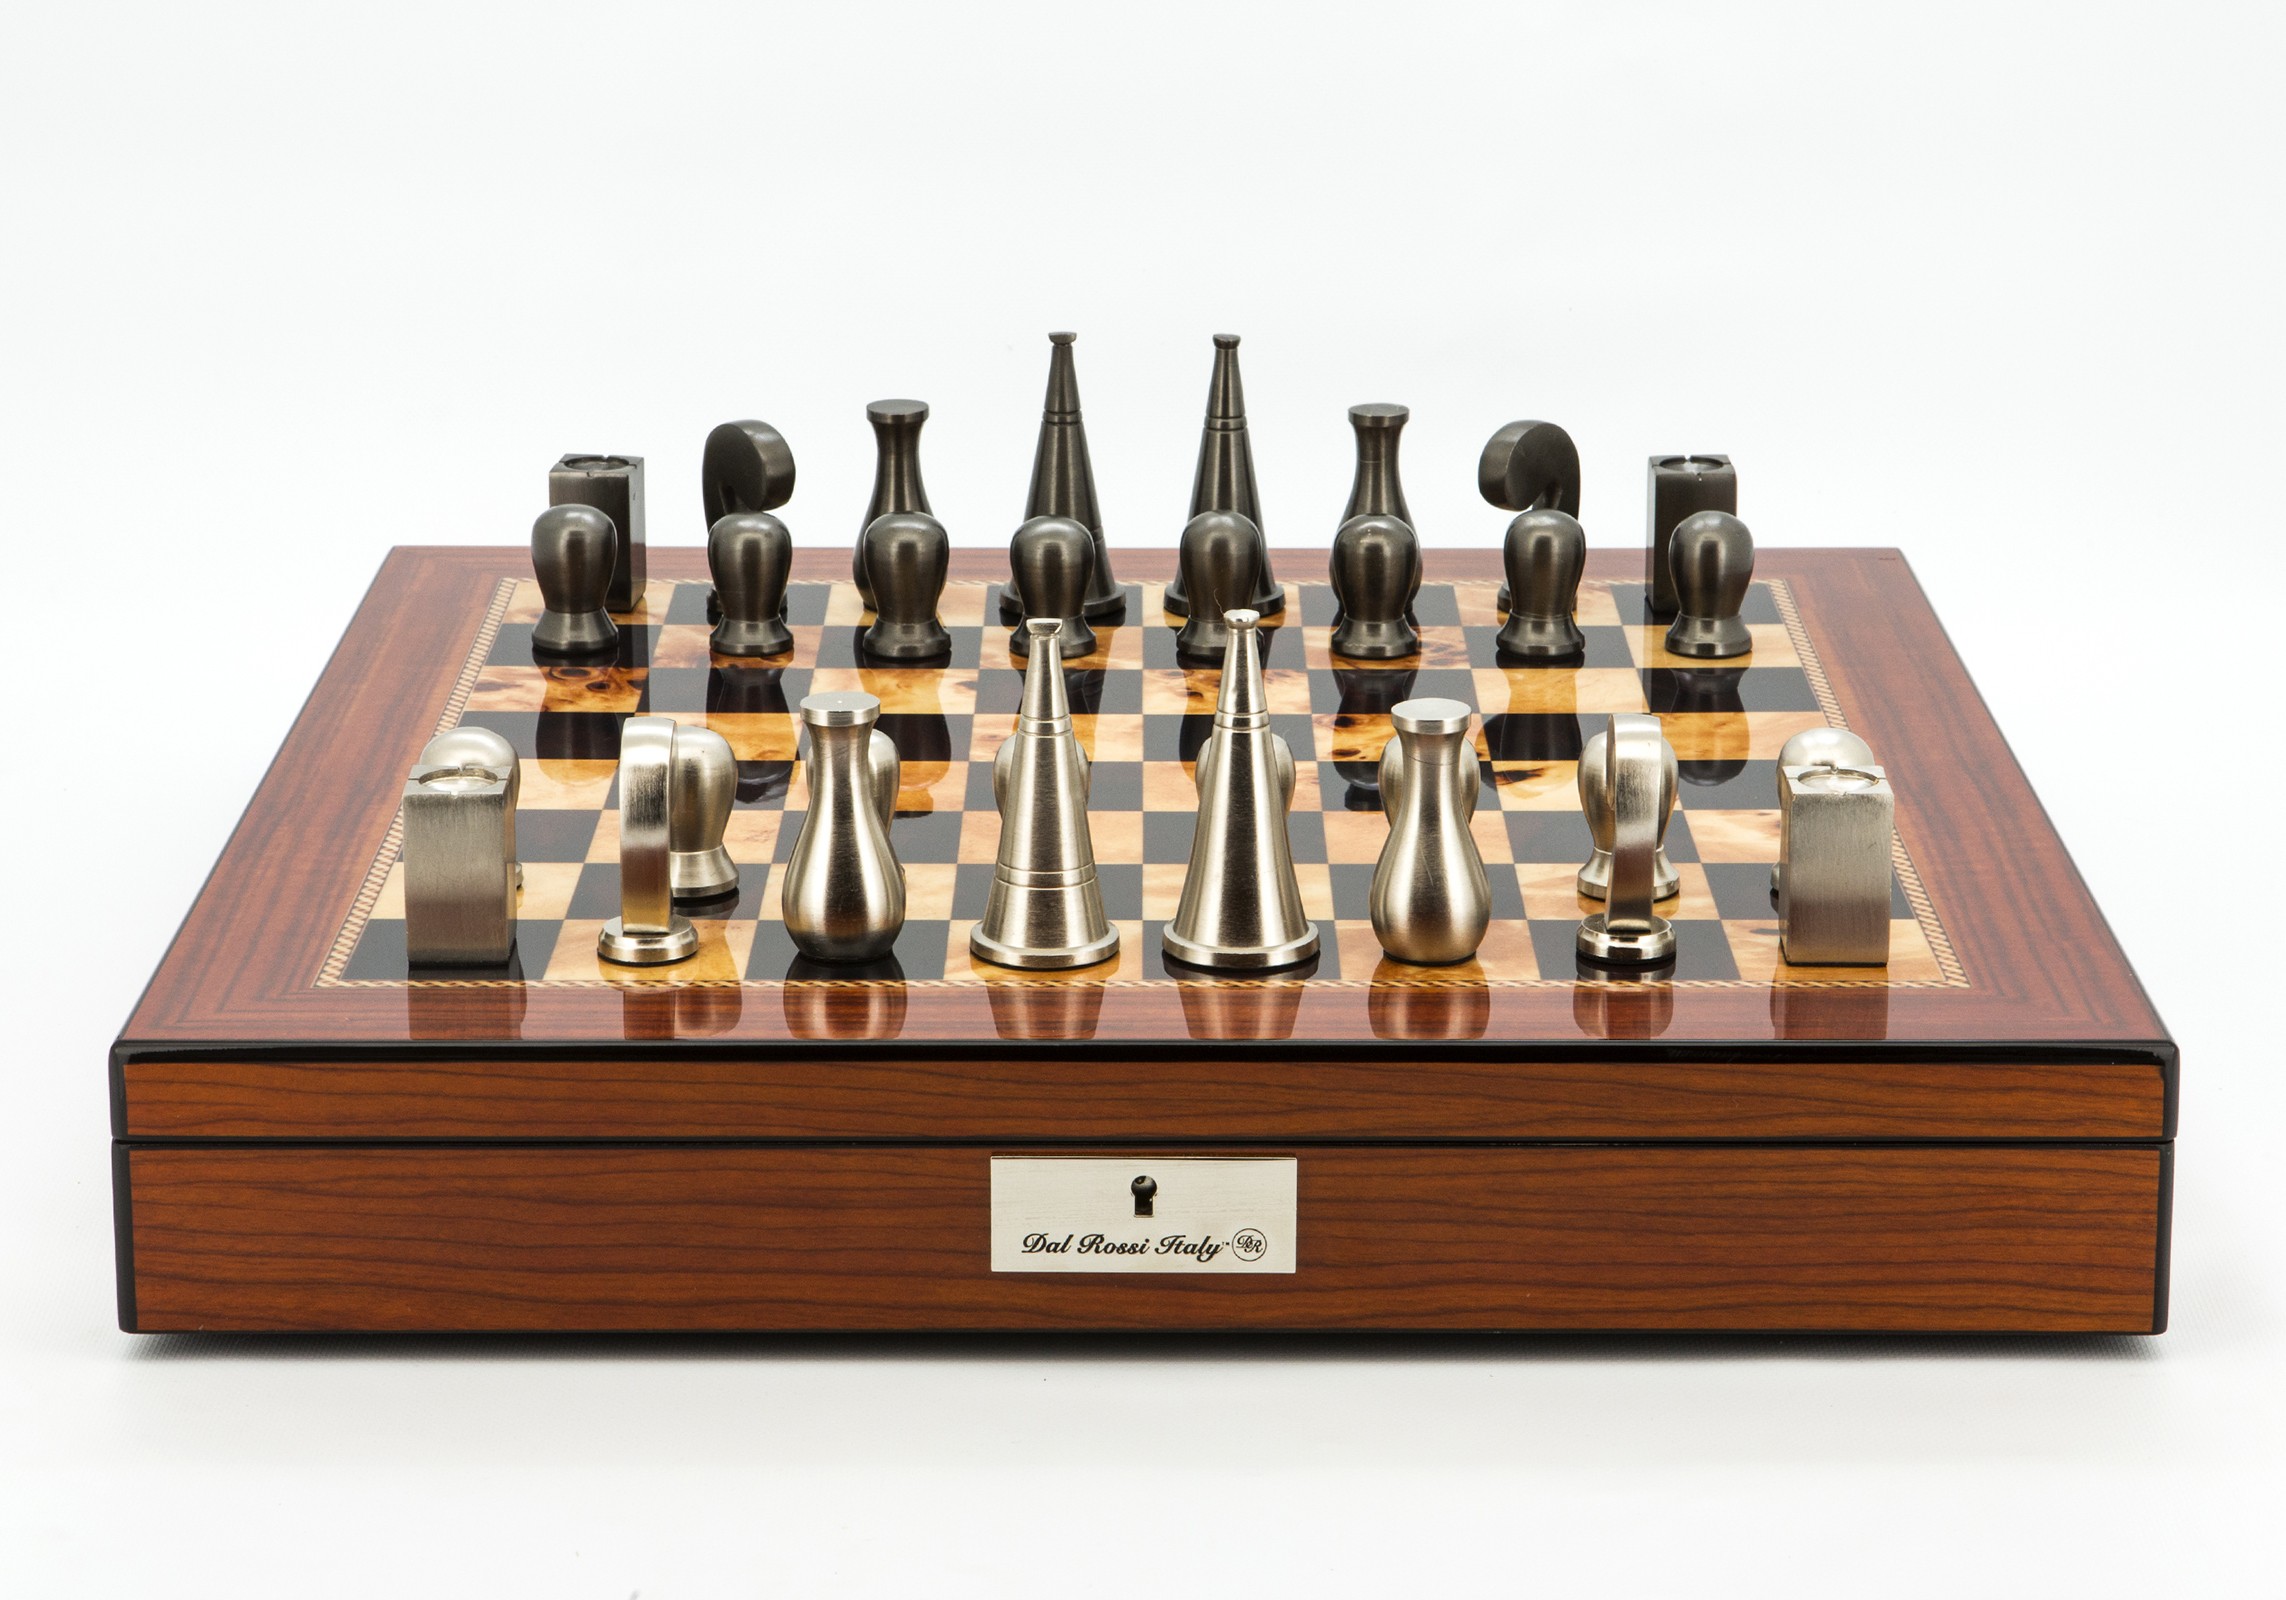 Dal Rossi Italy Chess Set Walnut Finish 20″ With Compartments, With Metal Dark Titanium and Silver 90mm Chessmen